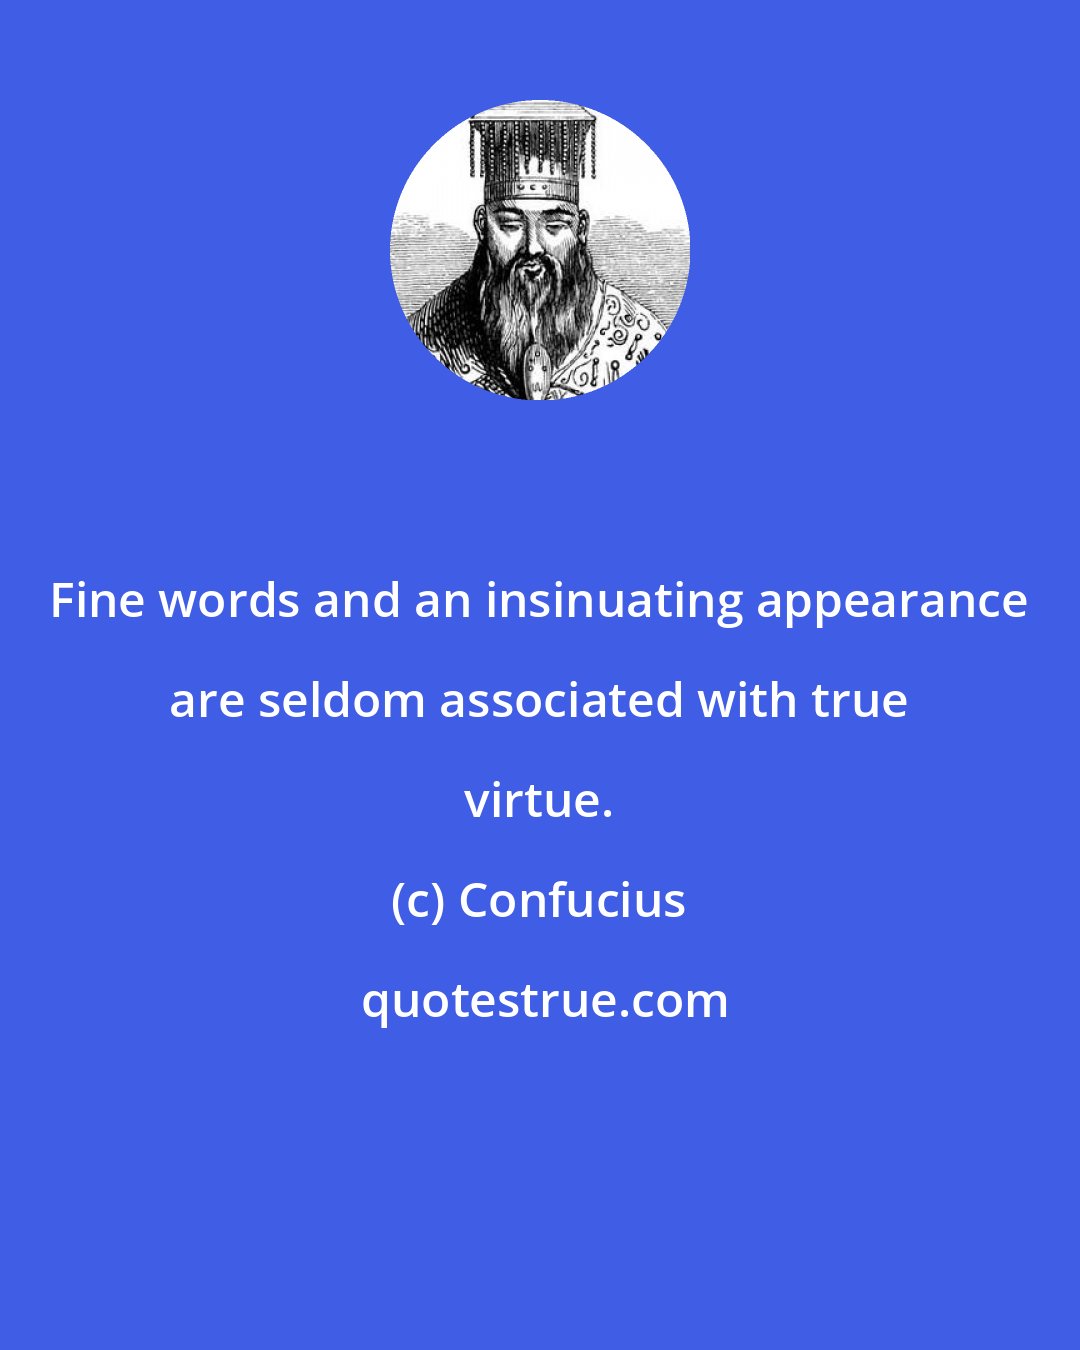 Confucius: Fine words and an insinuating appearance are seldom associated with true virtue.